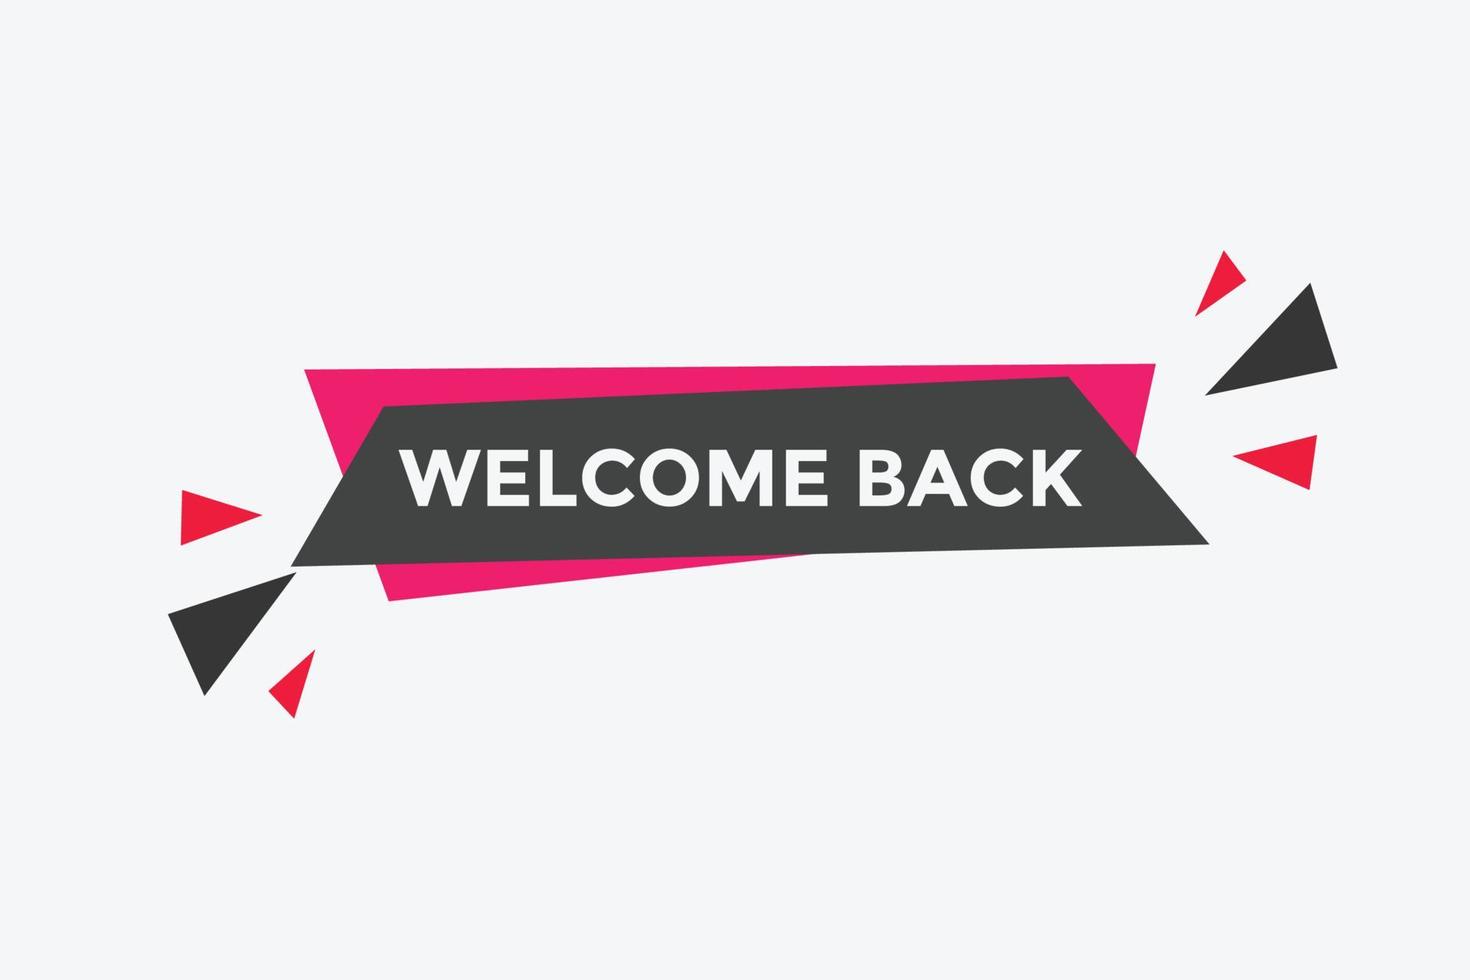 Welcome back button. speech bubble. Welcome web banner template. Vector Illustration.